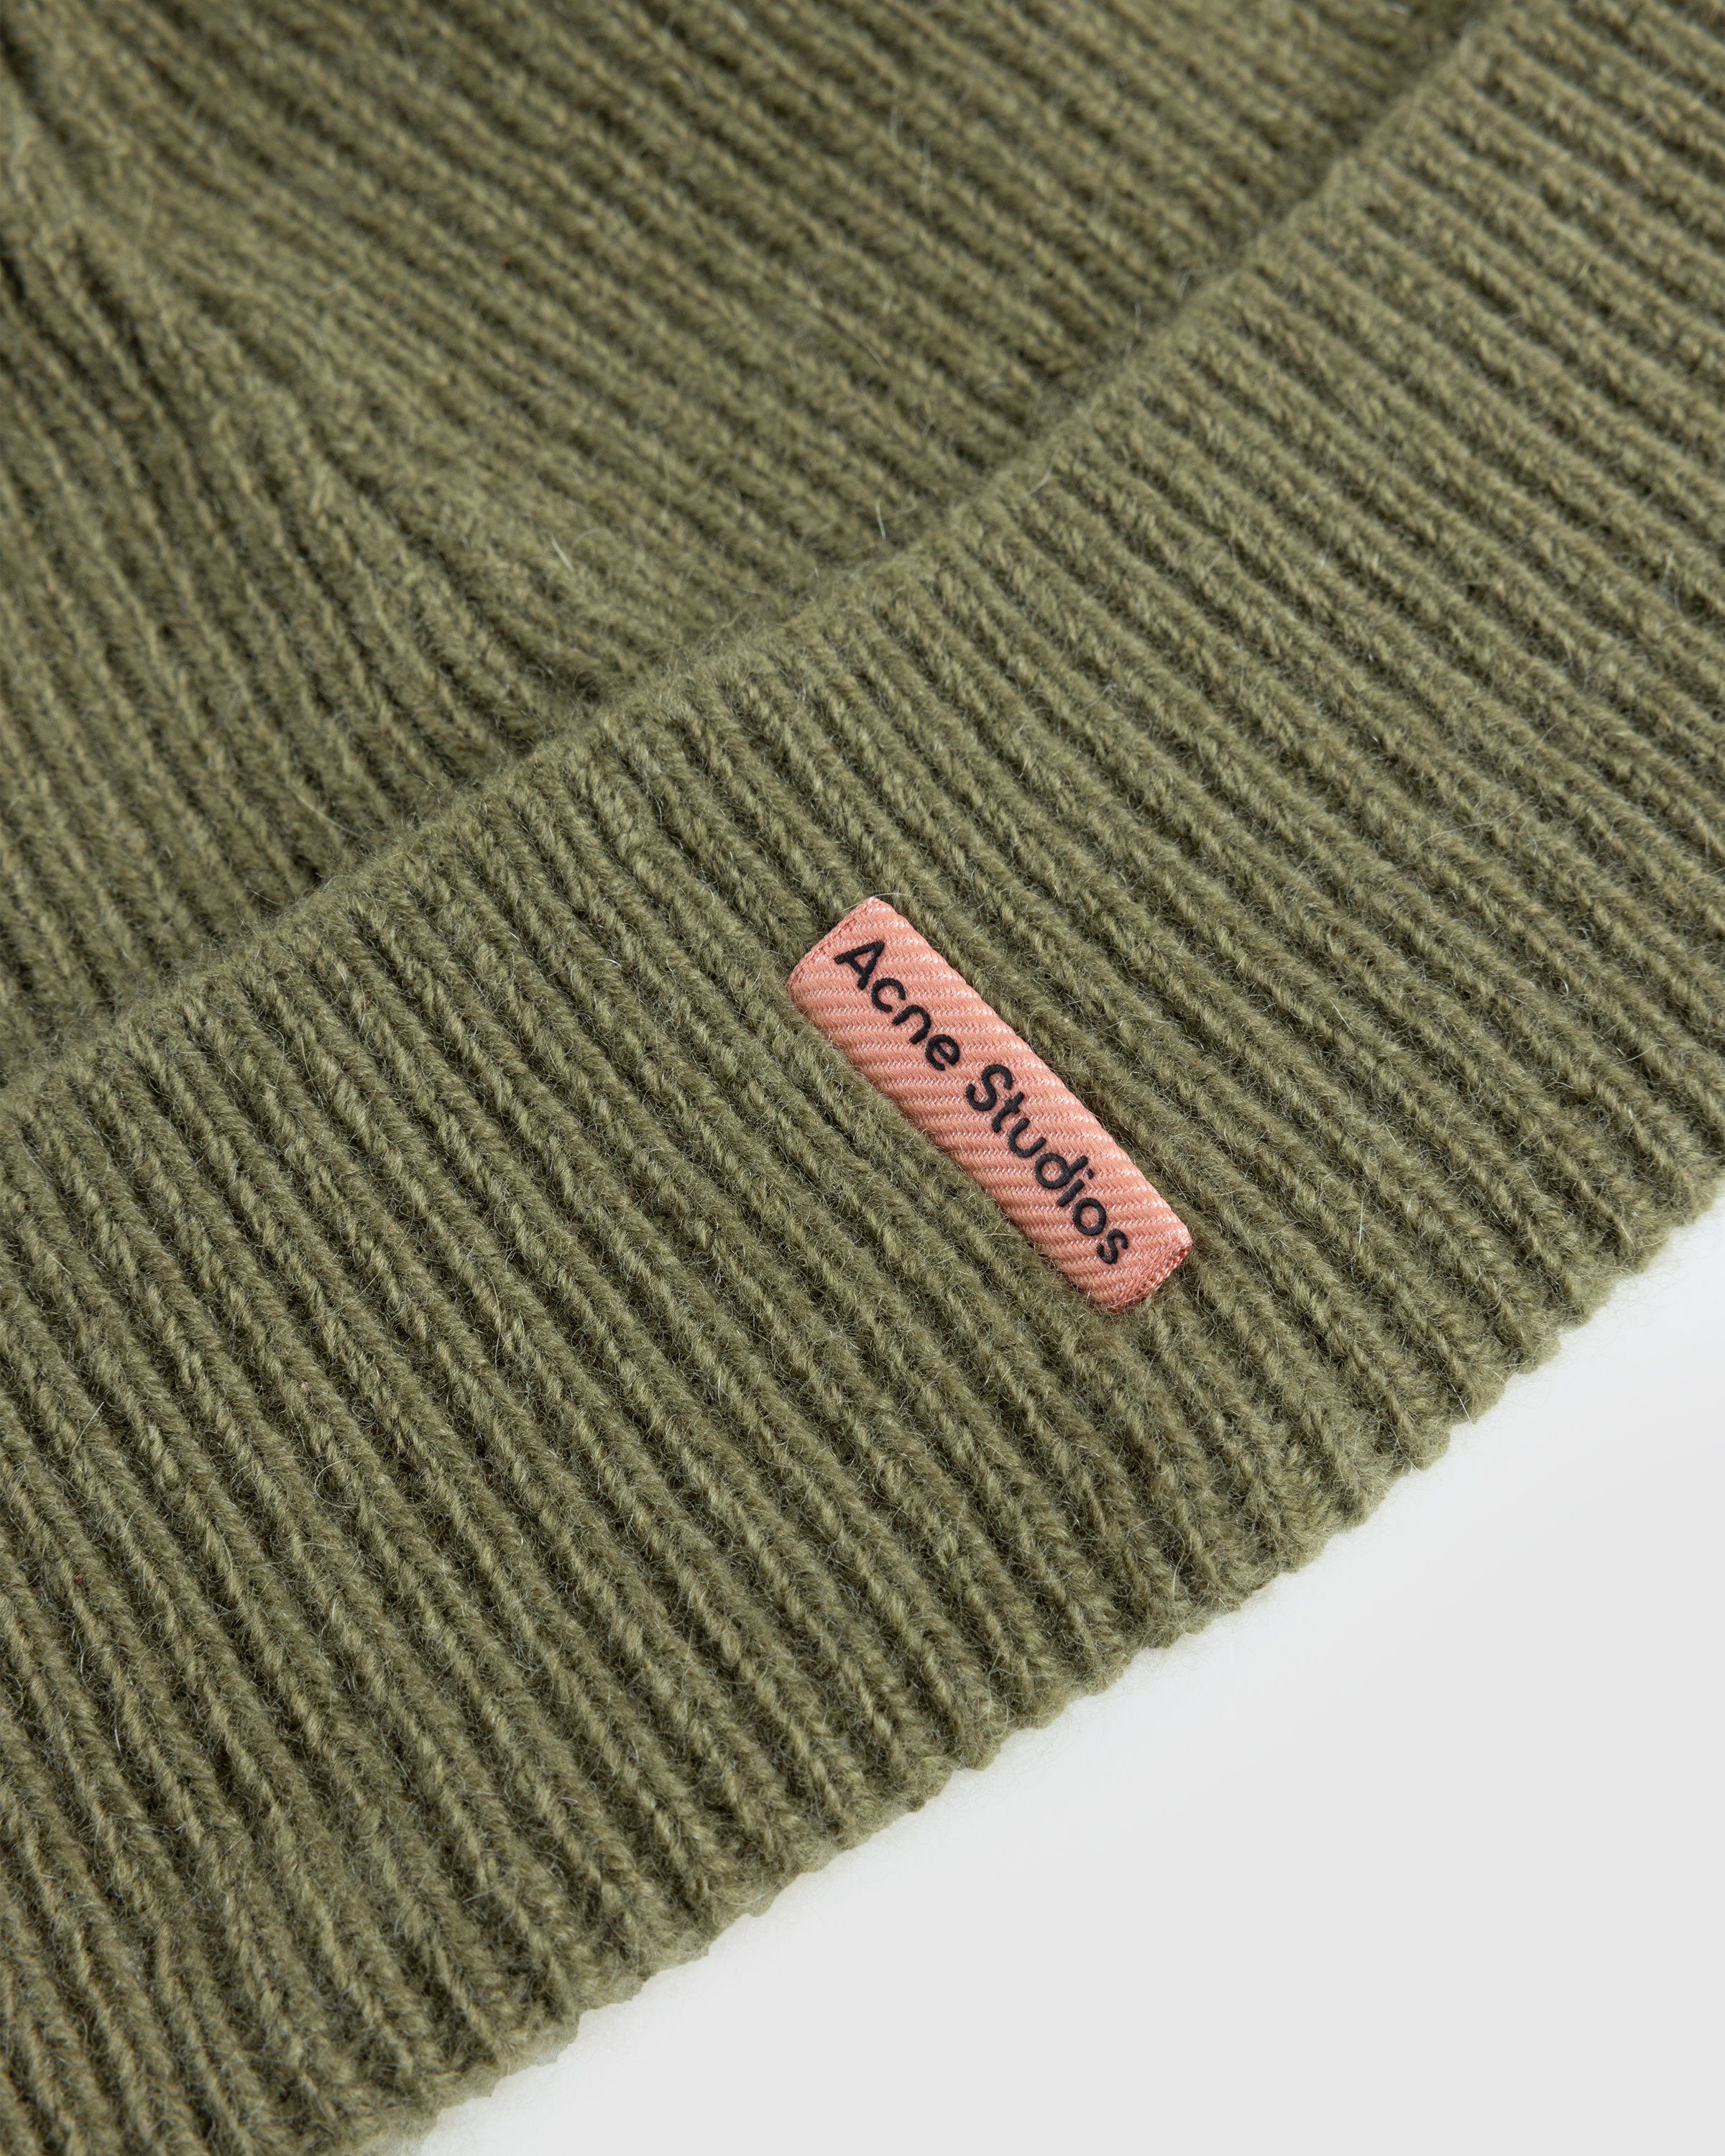 Acne Studios - FN-UX-HATS000187 Olive Green - Accessories - Green - Image 7